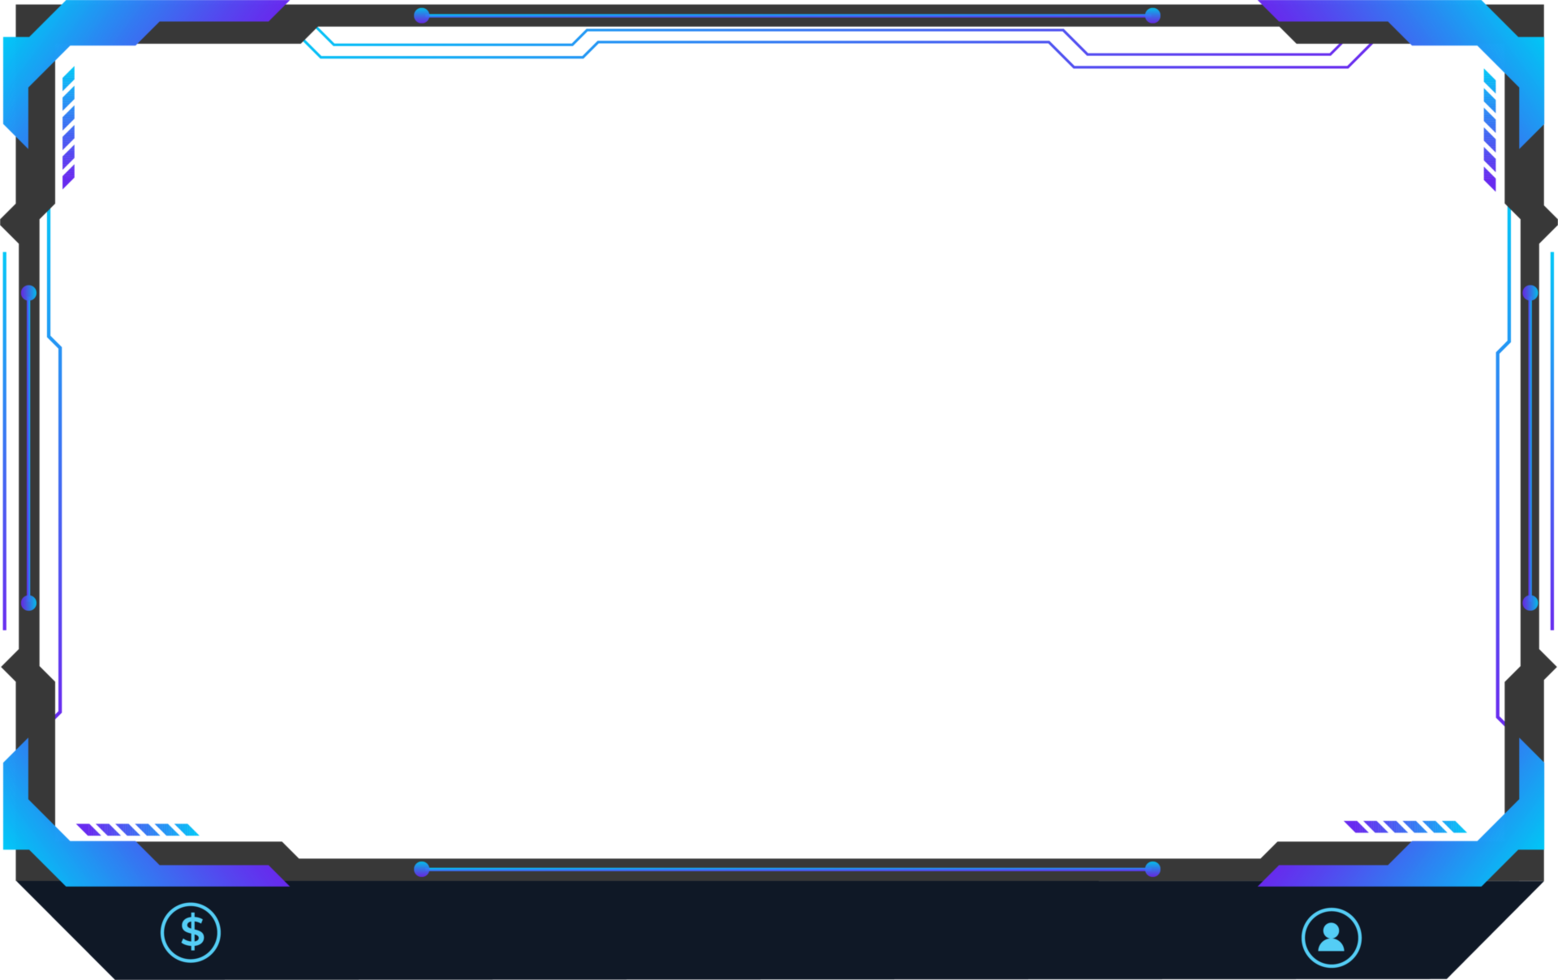 Futuristic live streaming overlay vector with frosty blue color. Live gaming screen panel and broadcast frame PNG with abstract shapes. Streaming panel overlay PNG for gamers.